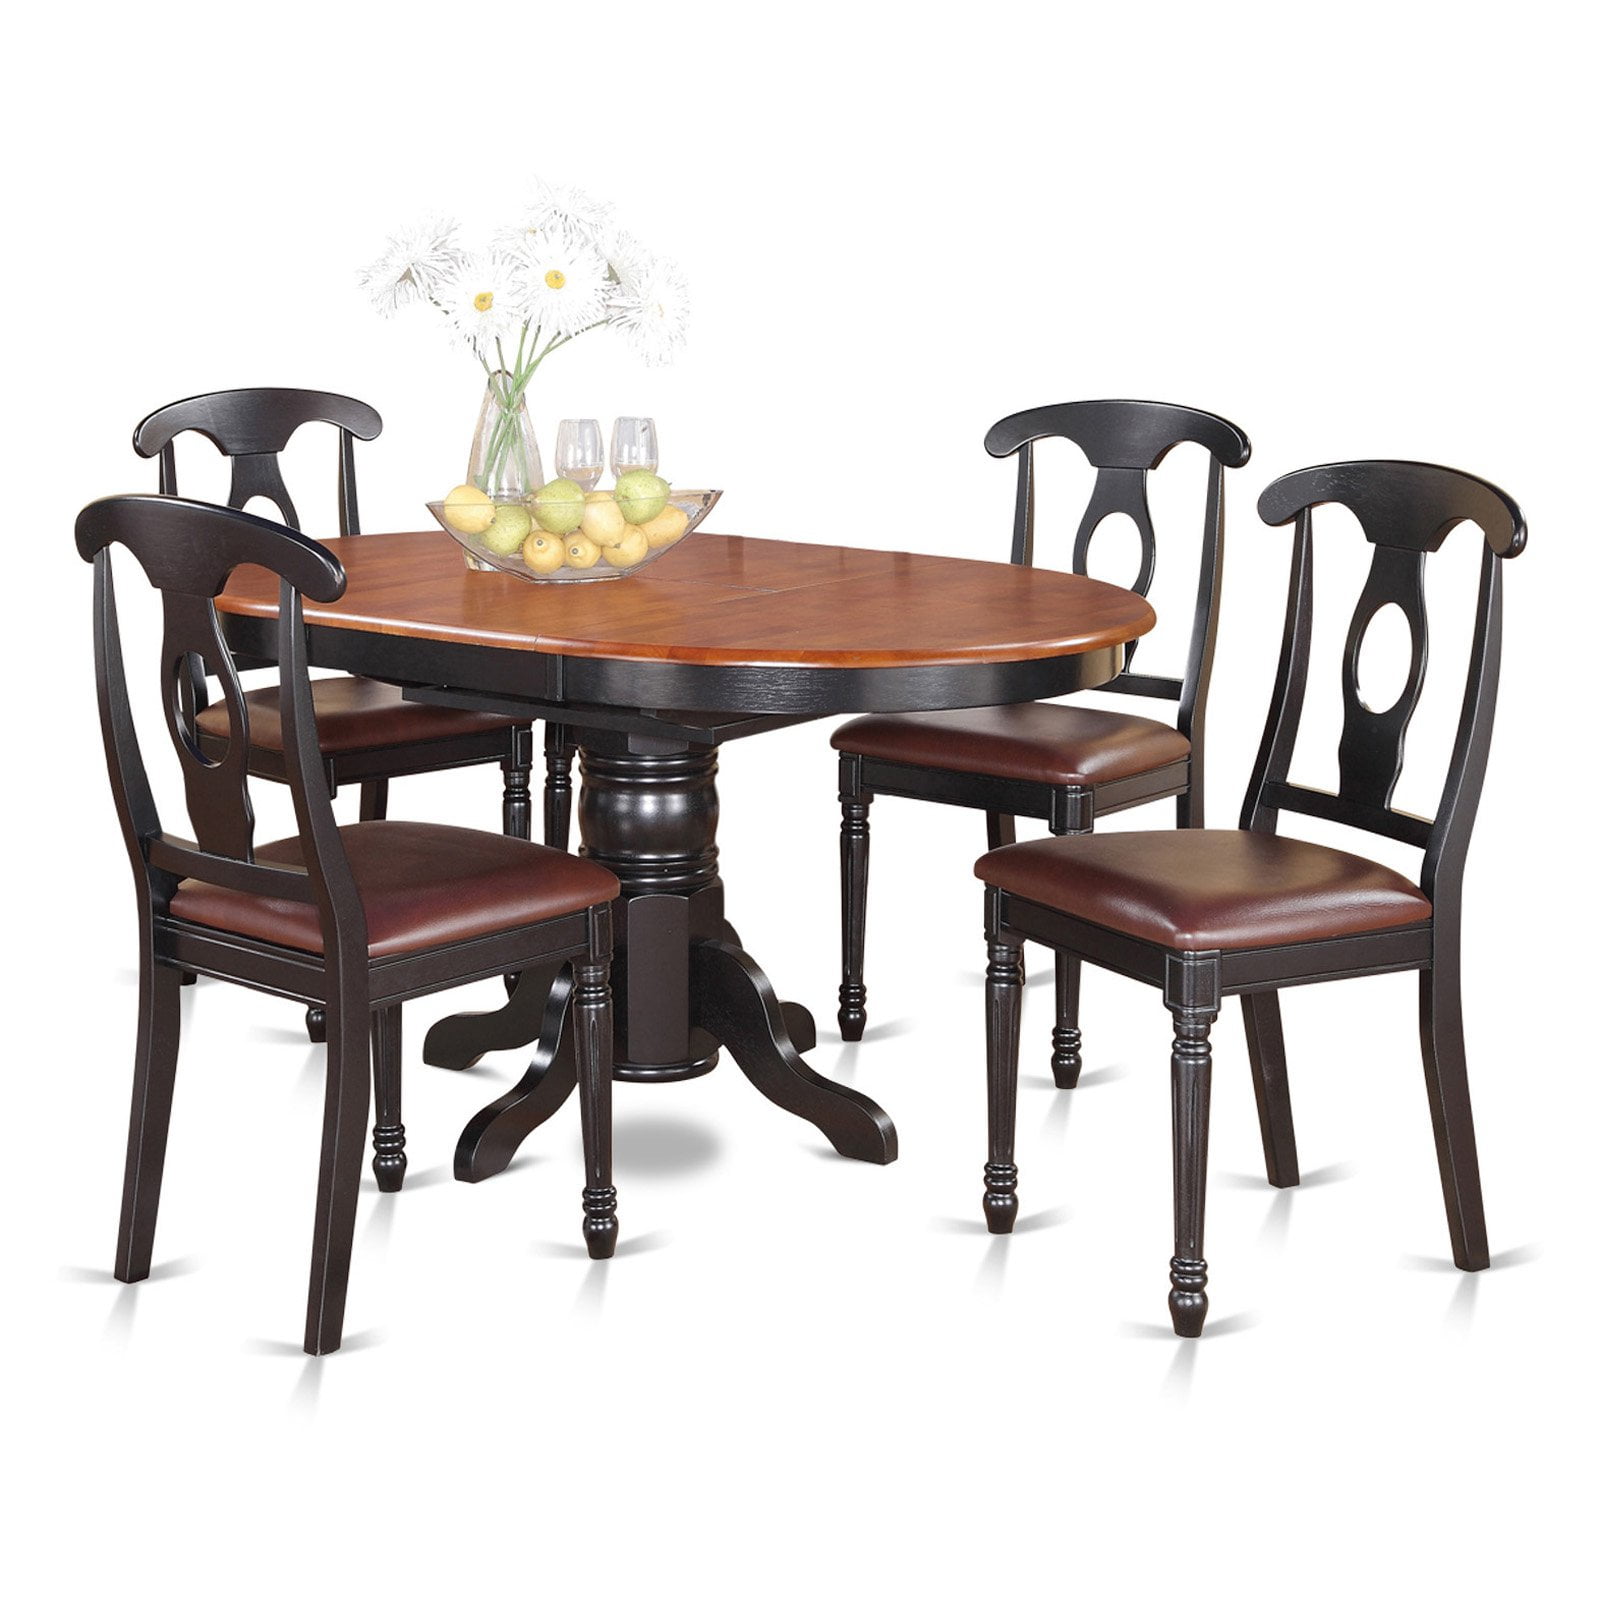 East West Furniture Avon 5 Piece Oval Pedestal Dining Table Set with ...